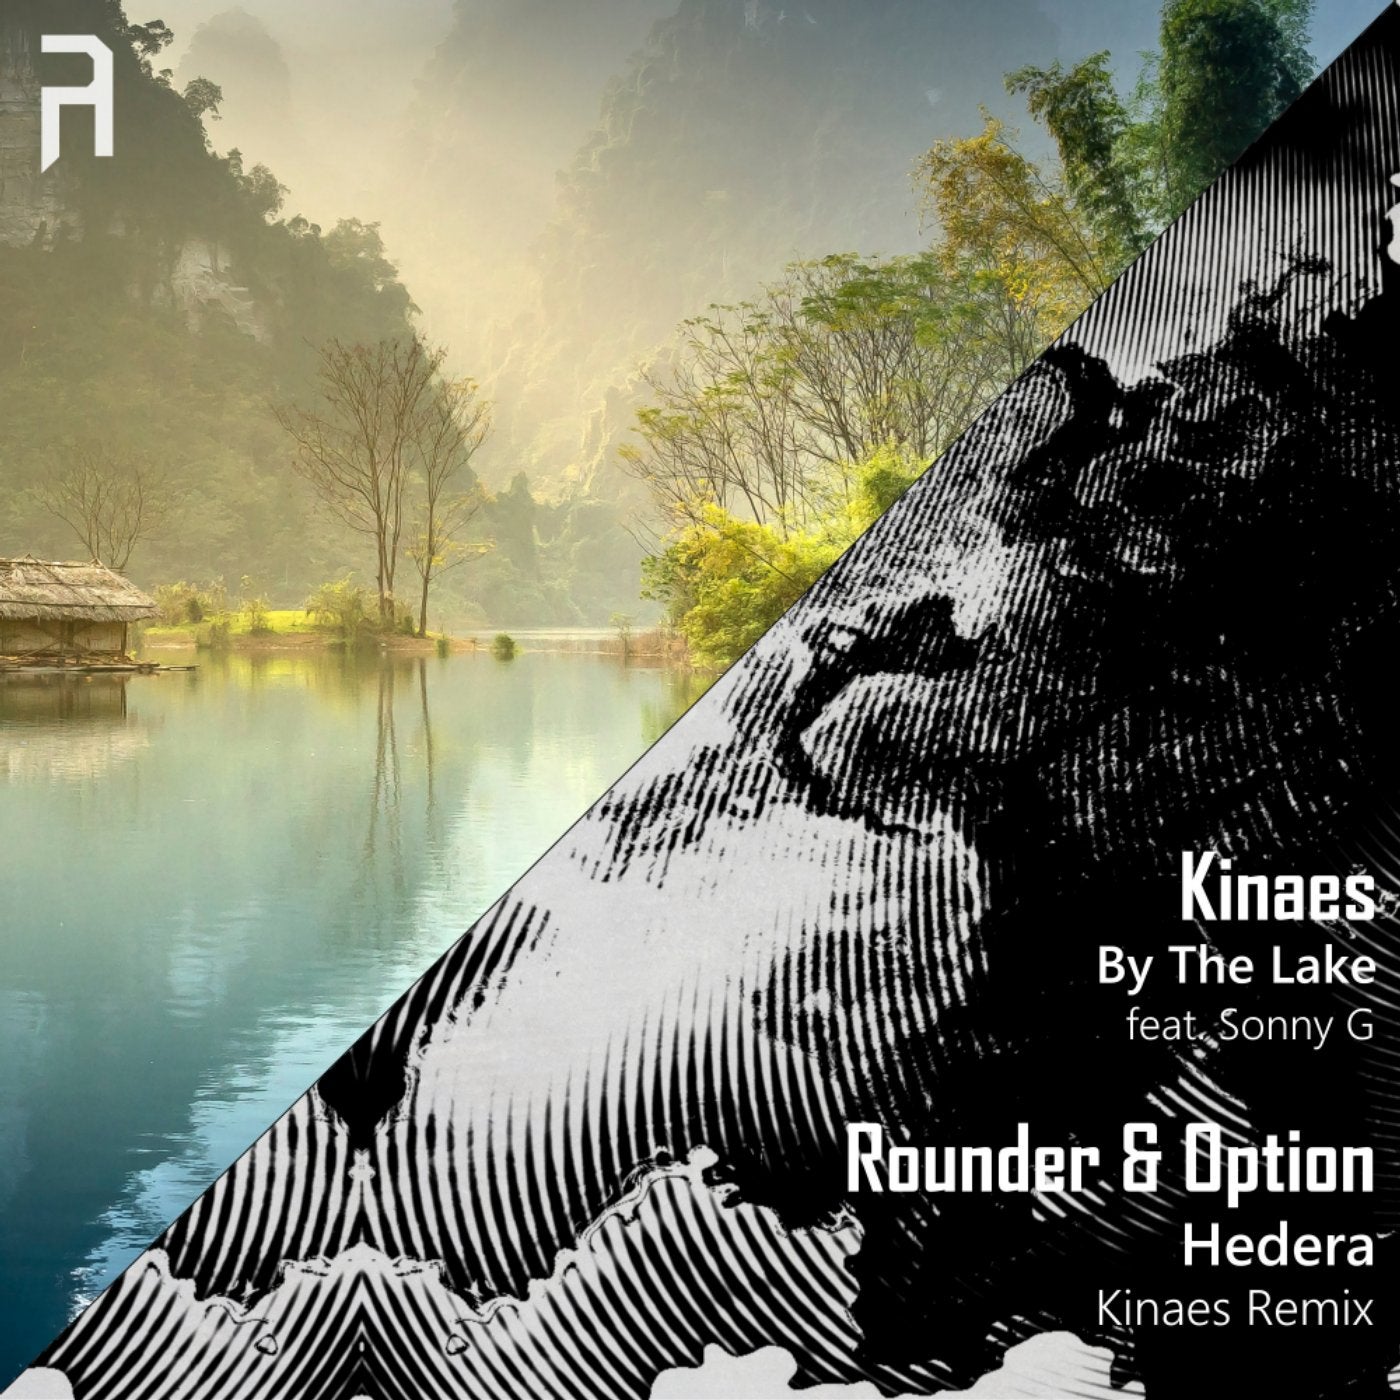 By The Lake / Hedera (Kinaes Remix)